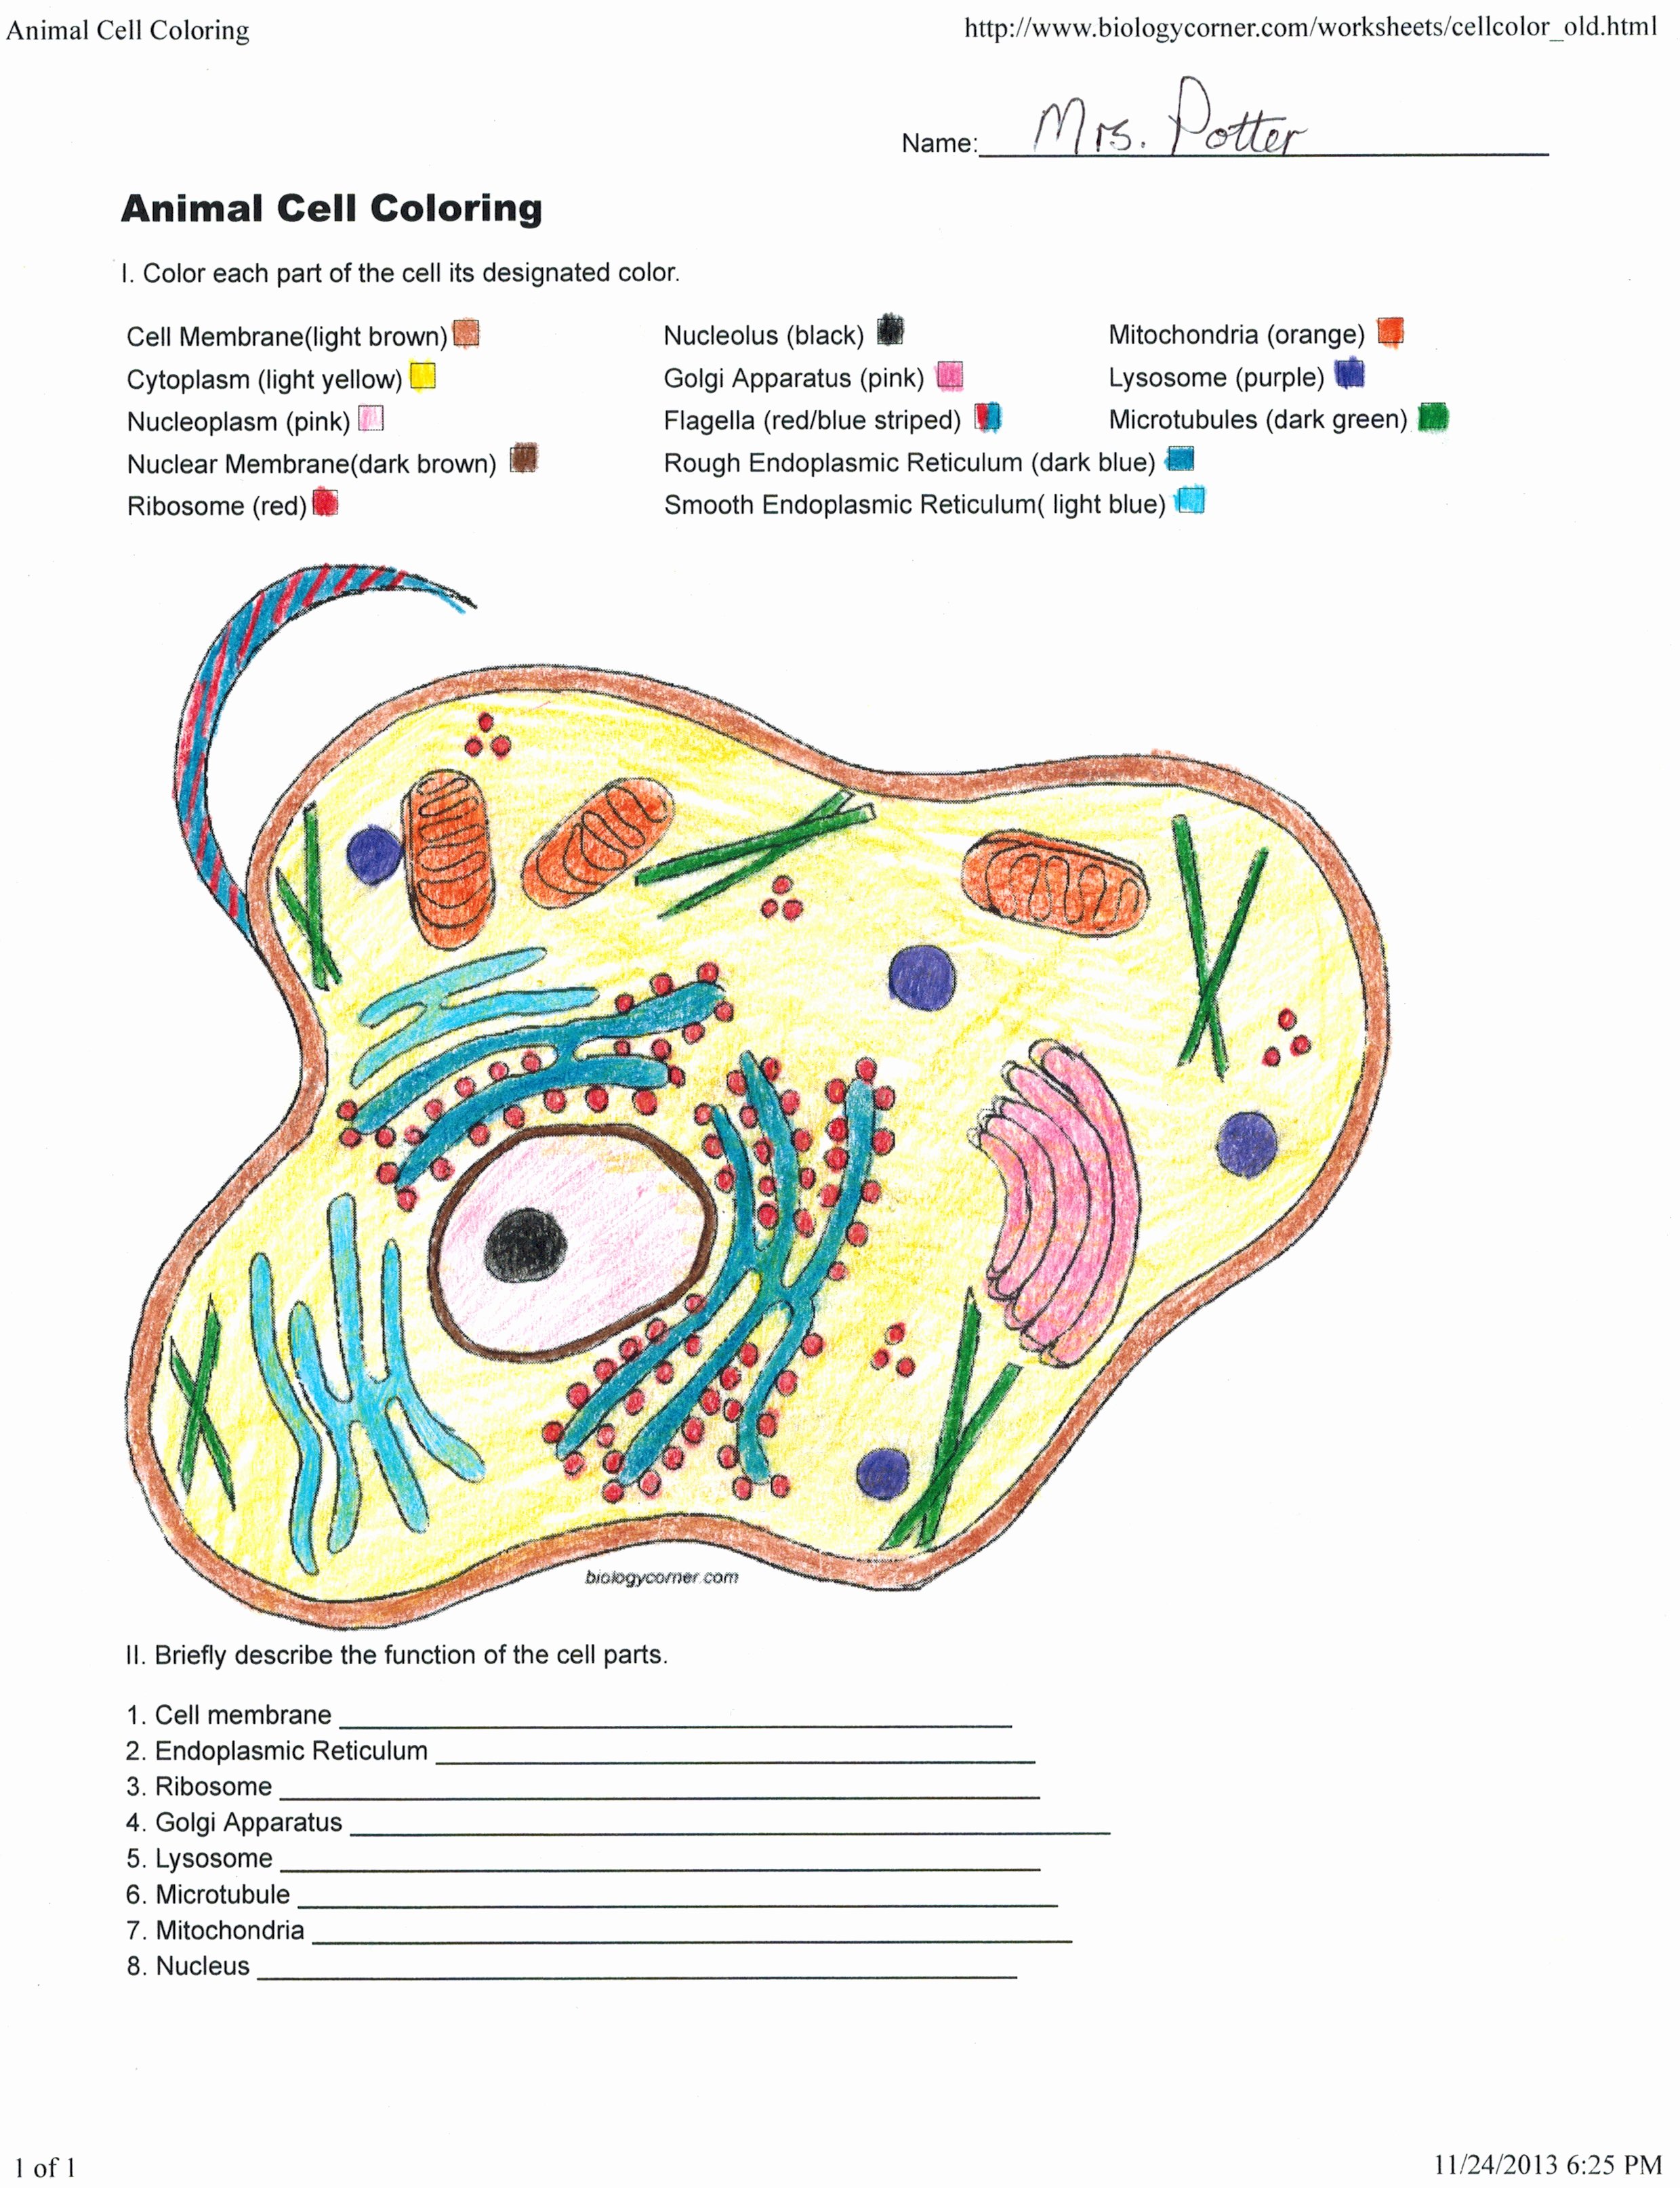 Animal Cells Coloring Worksheet Lovely Apologia Biology